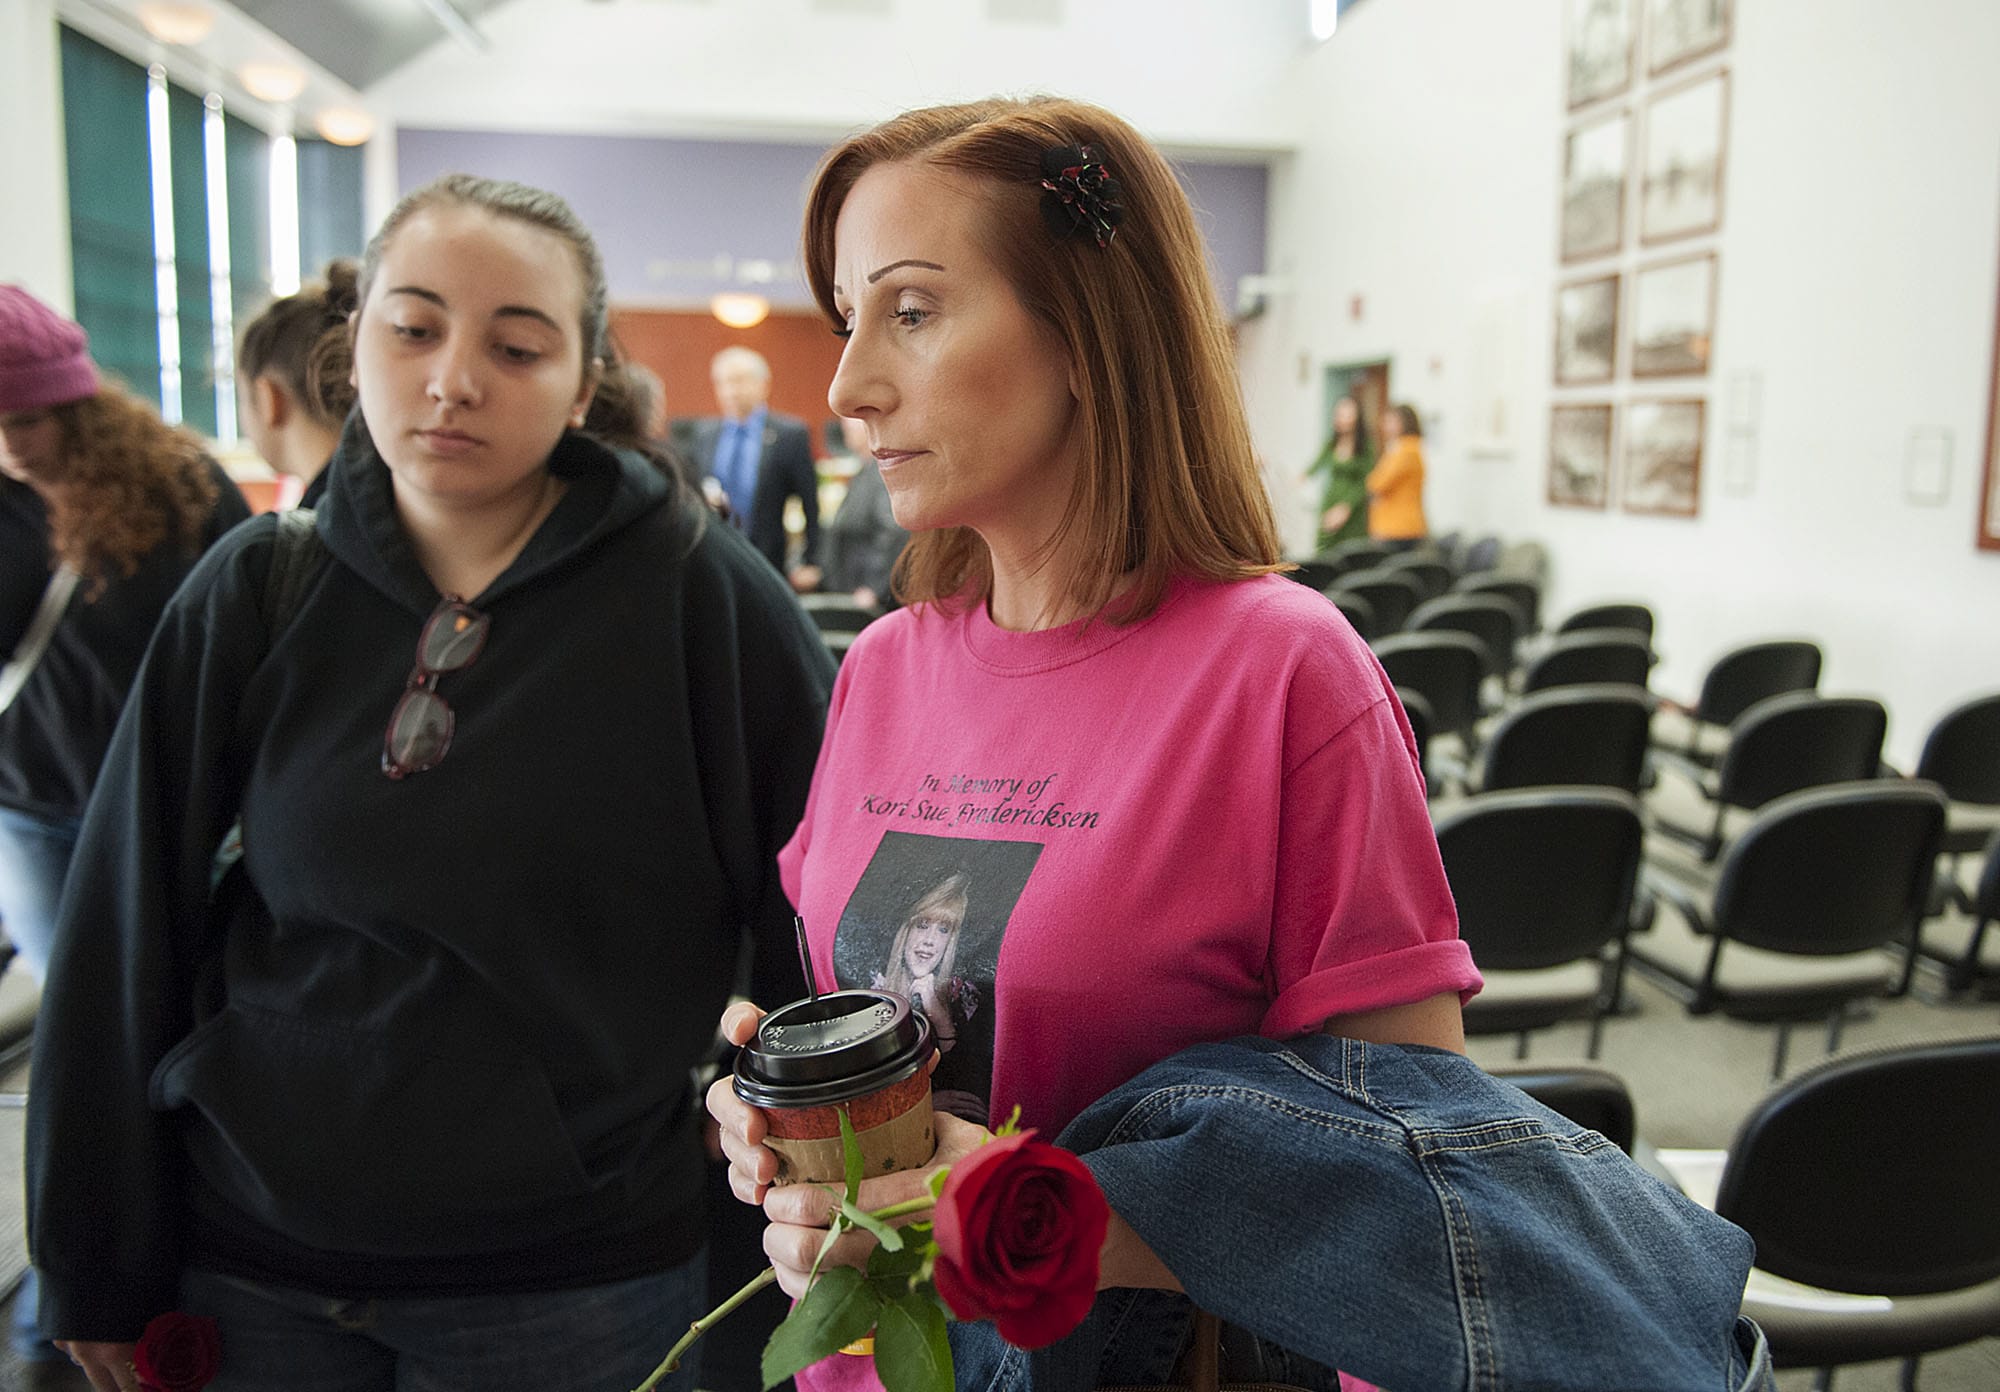 Tammi Murphy of Vancouver, center, wears a t-shirt in honor of the memory of her sister, Kori Fredericksen, while joined by daughter, Destiny Murphy, left, Wednesday morning, Sept. 16, 2015, at the Vancouver Clark County Public Service Center.